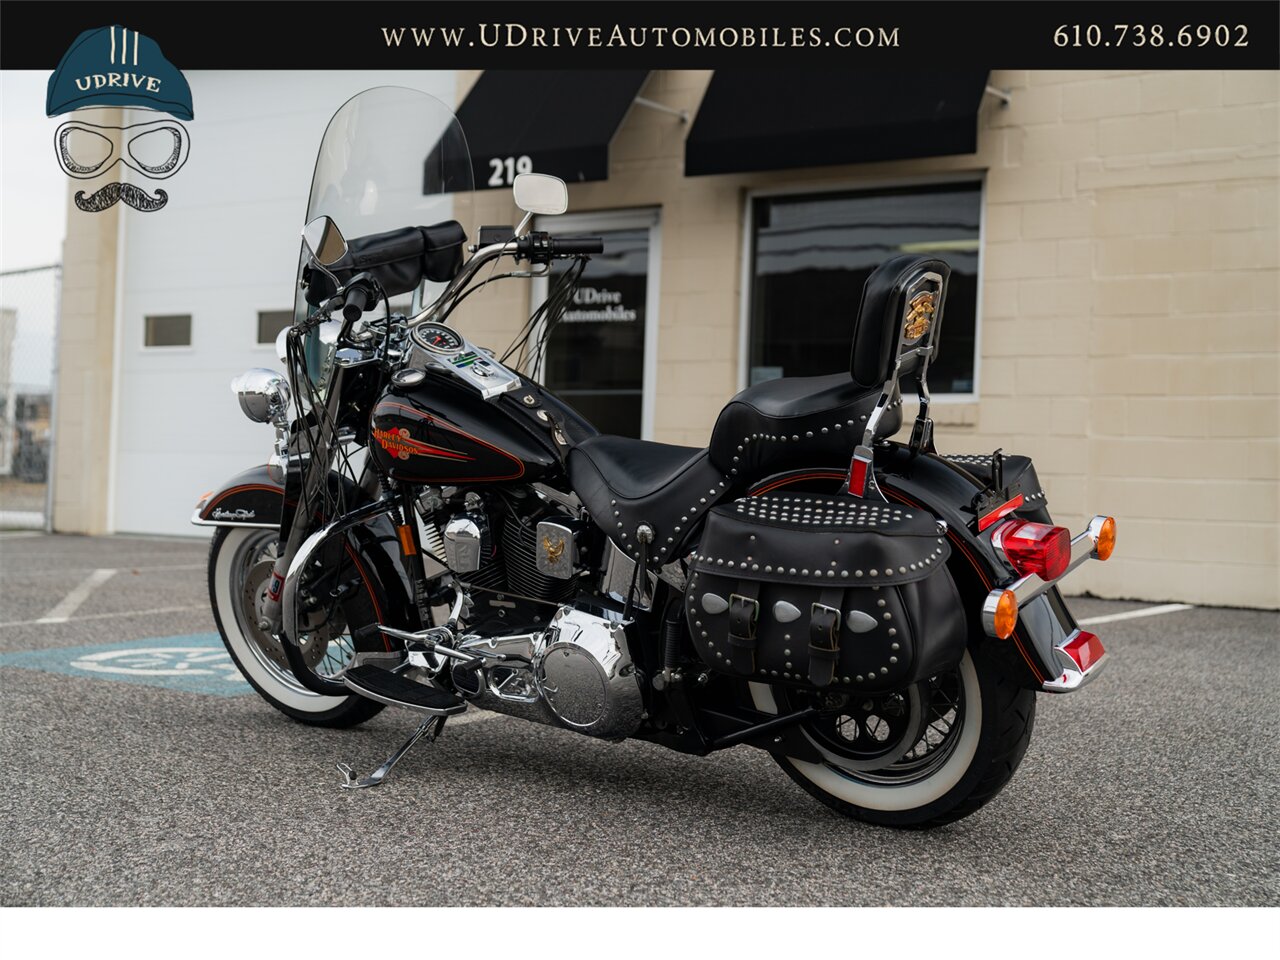 1994 Harley-Davidson Touring FLSTC  Heritage Softail Classic 2k Miles 1 Owner Service History - Photo 31 - West Chester, PA 19382